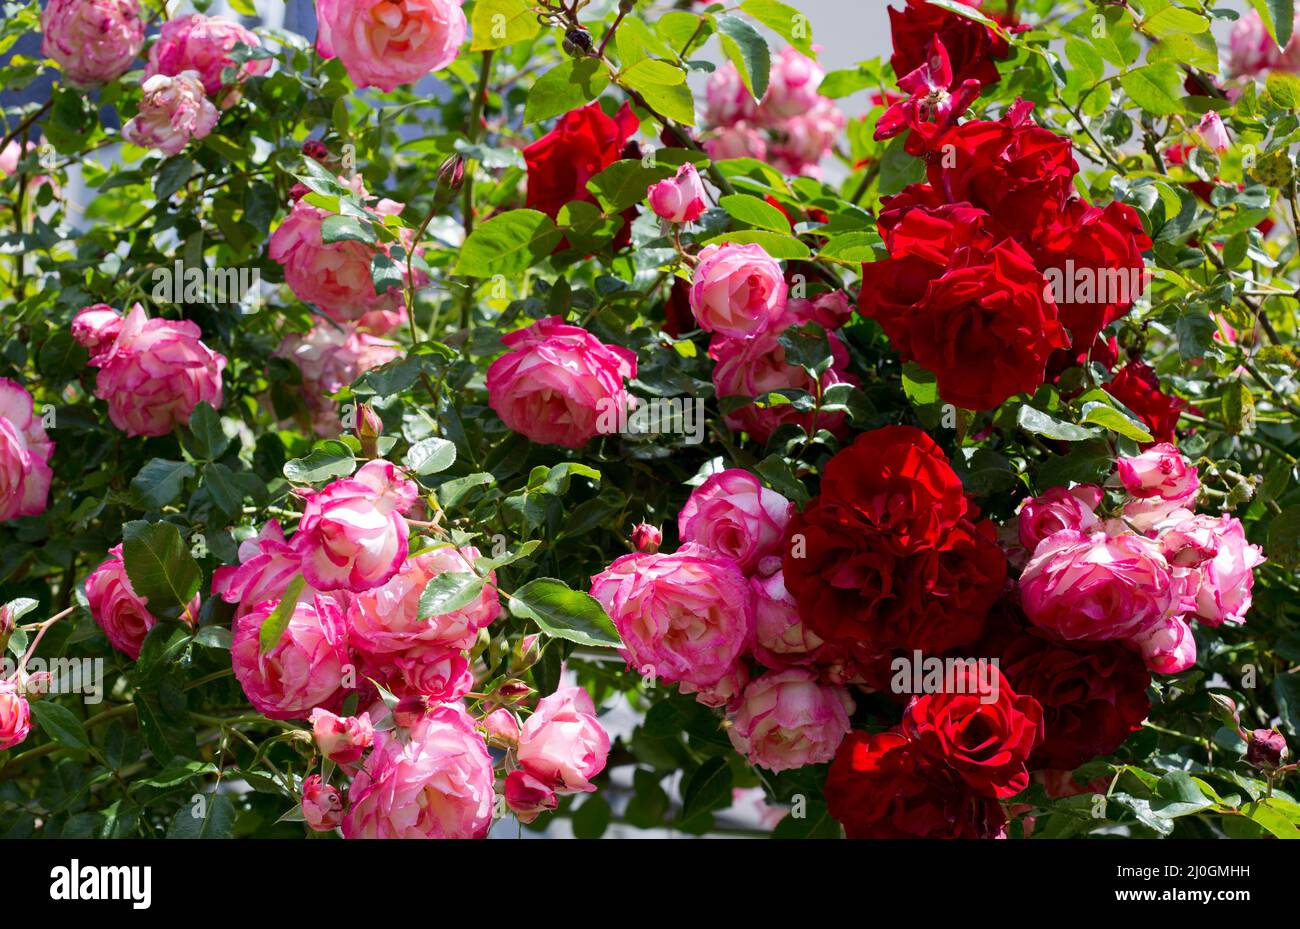 Beautiful red and pink rose garden background Stock Photo